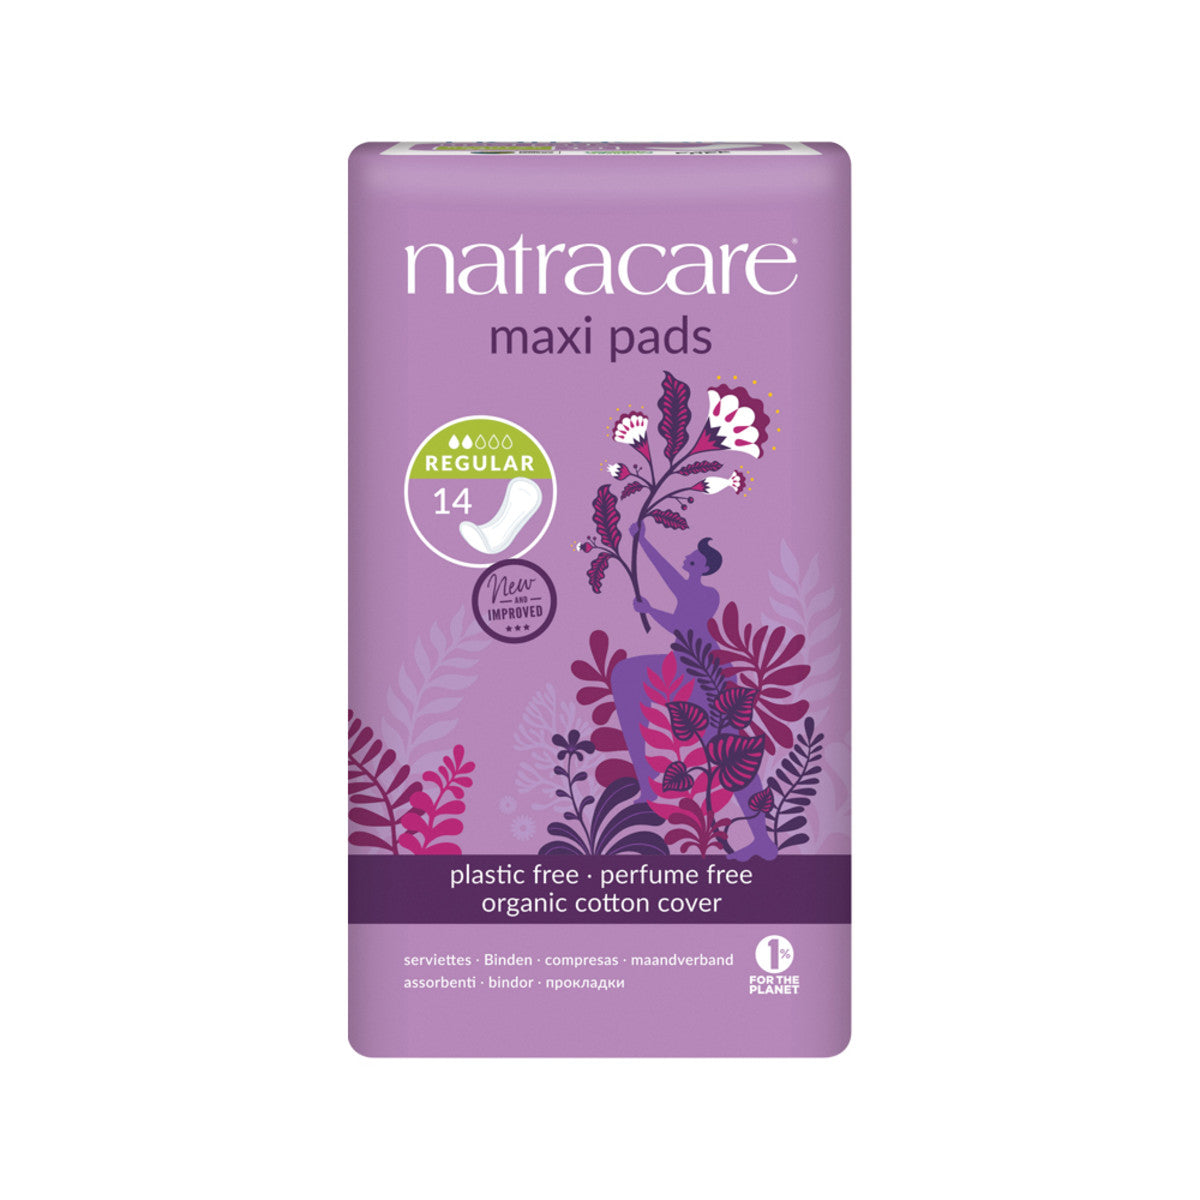 Natracare Maxi Pads Regular 14-The Living Co.